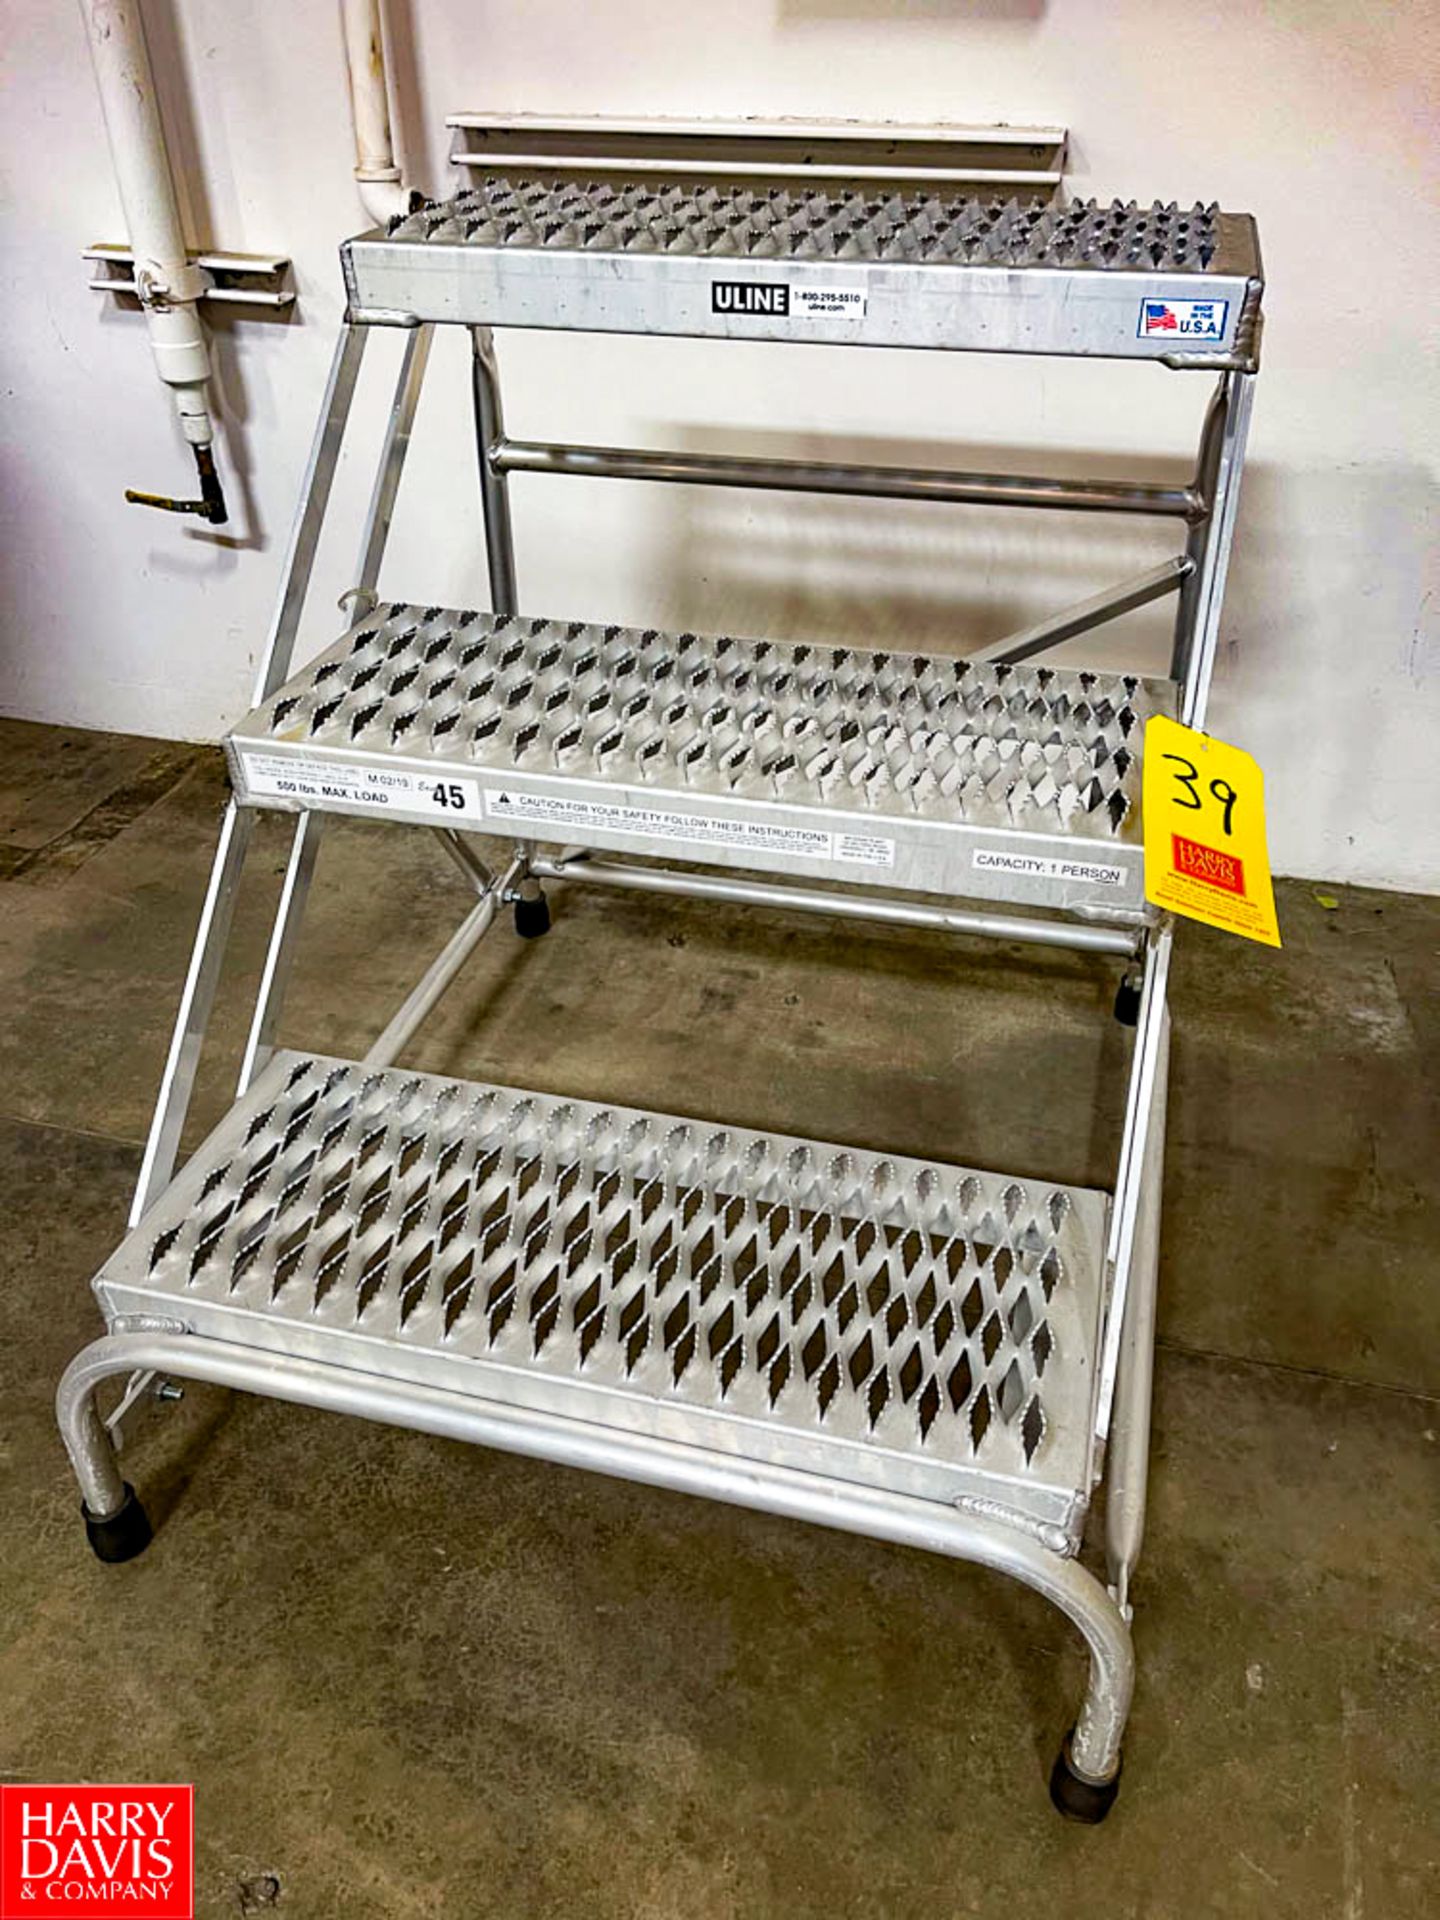 Uline 30" Portable Stairs Model M02/19, 500 Pound Capacity. Rigging Fee: $75